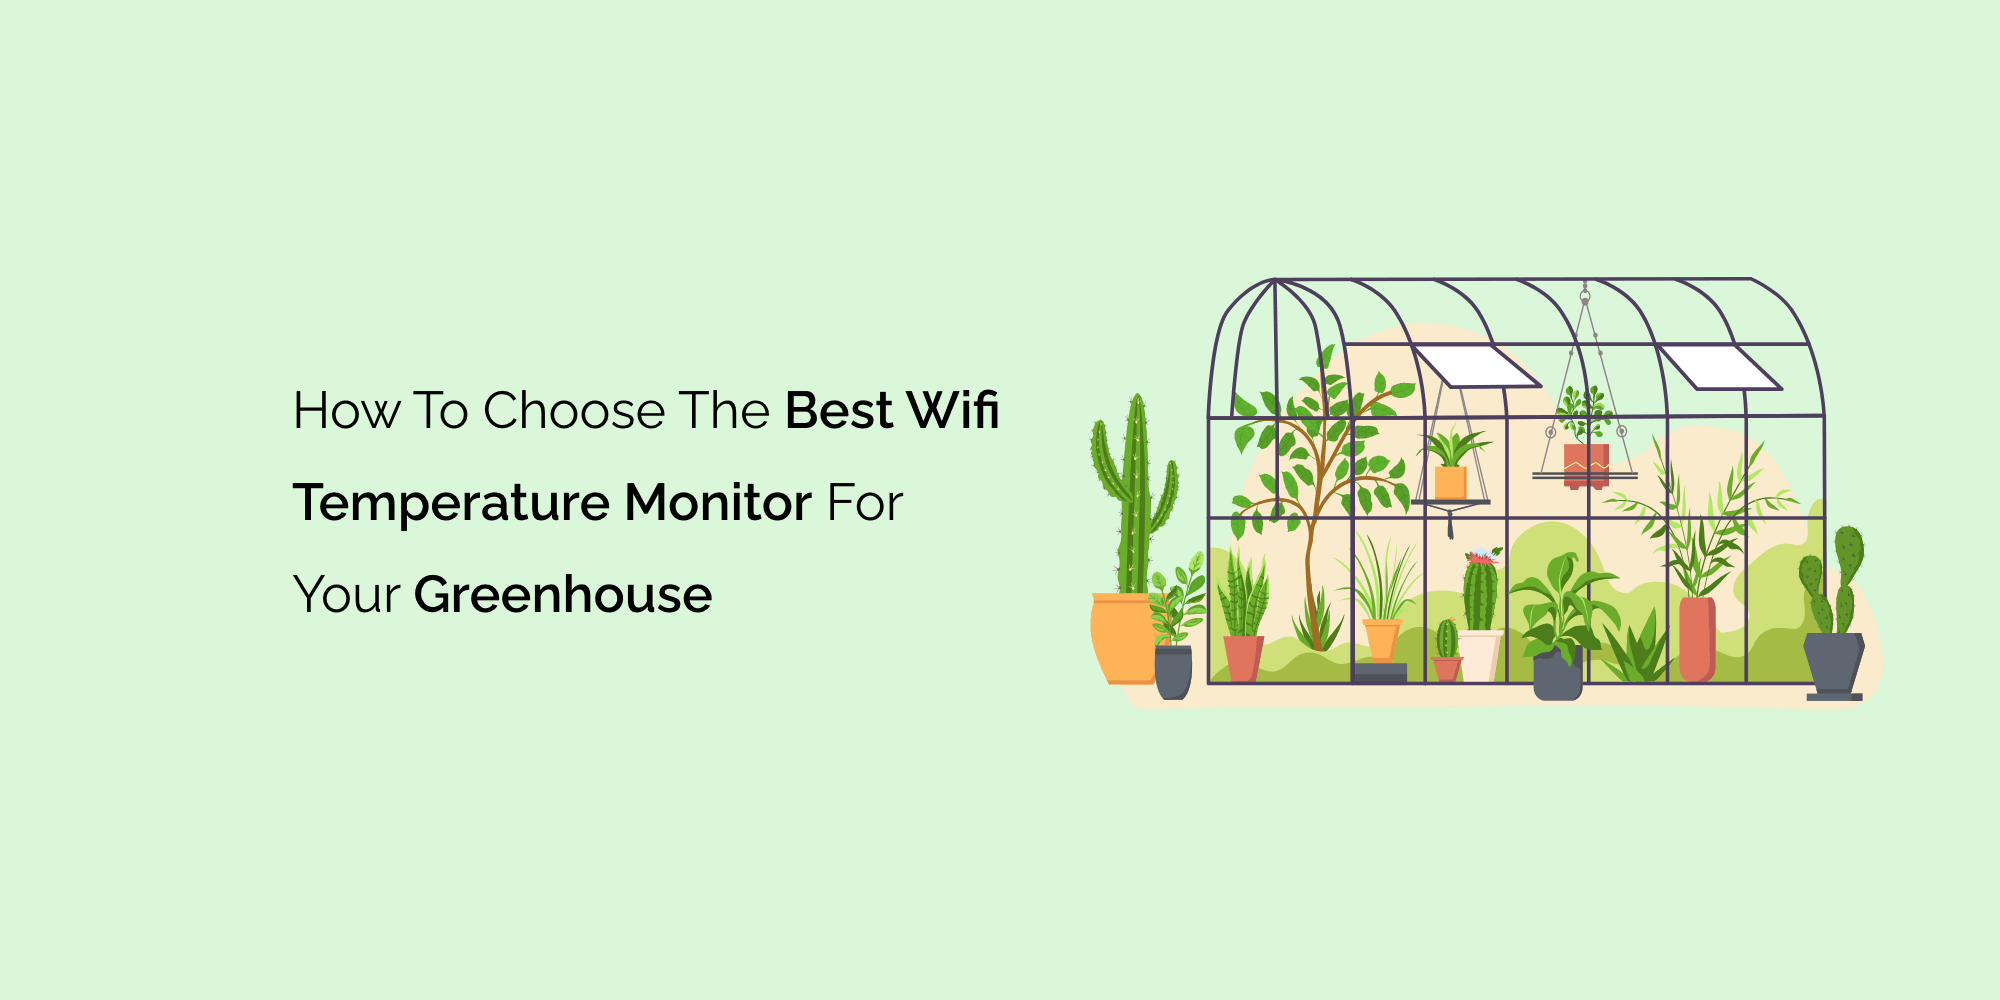 How to Choose the Best Wifi Temperature Monitor for Your Greenhouse